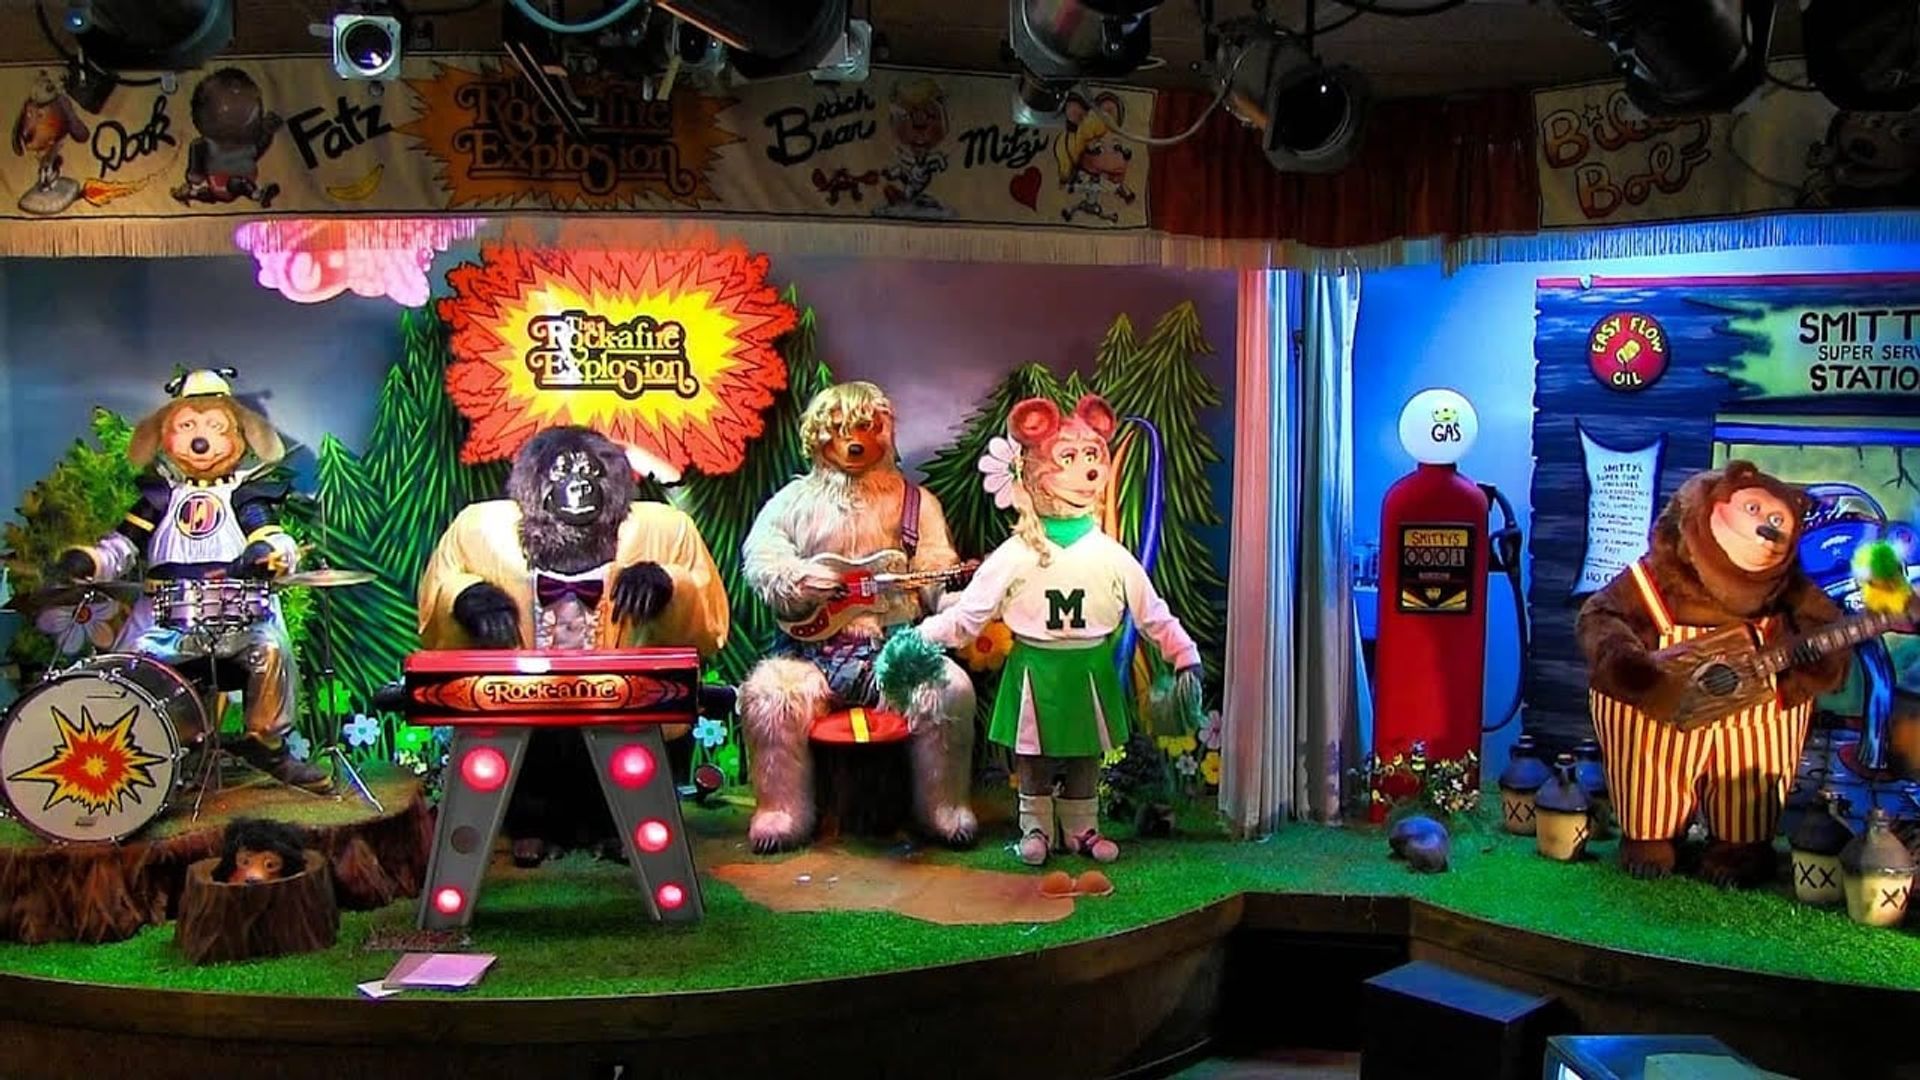 The Rock-afire Explosion background